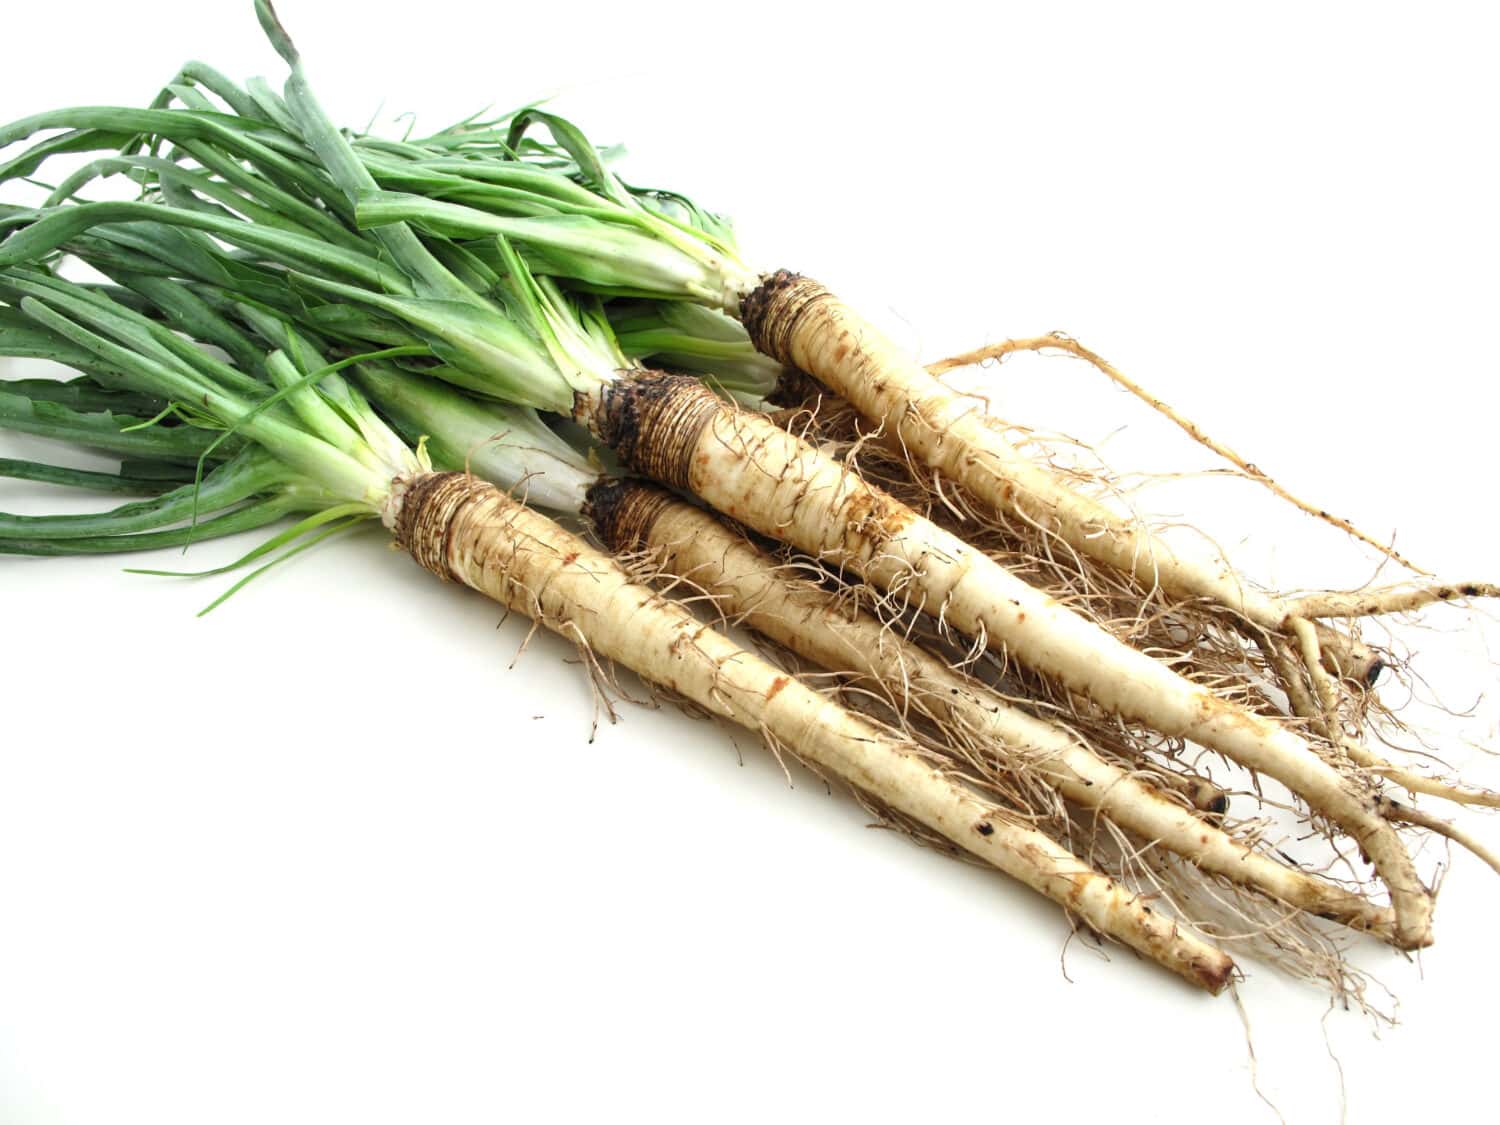 Bunch of salsify root vegetables on a white background          